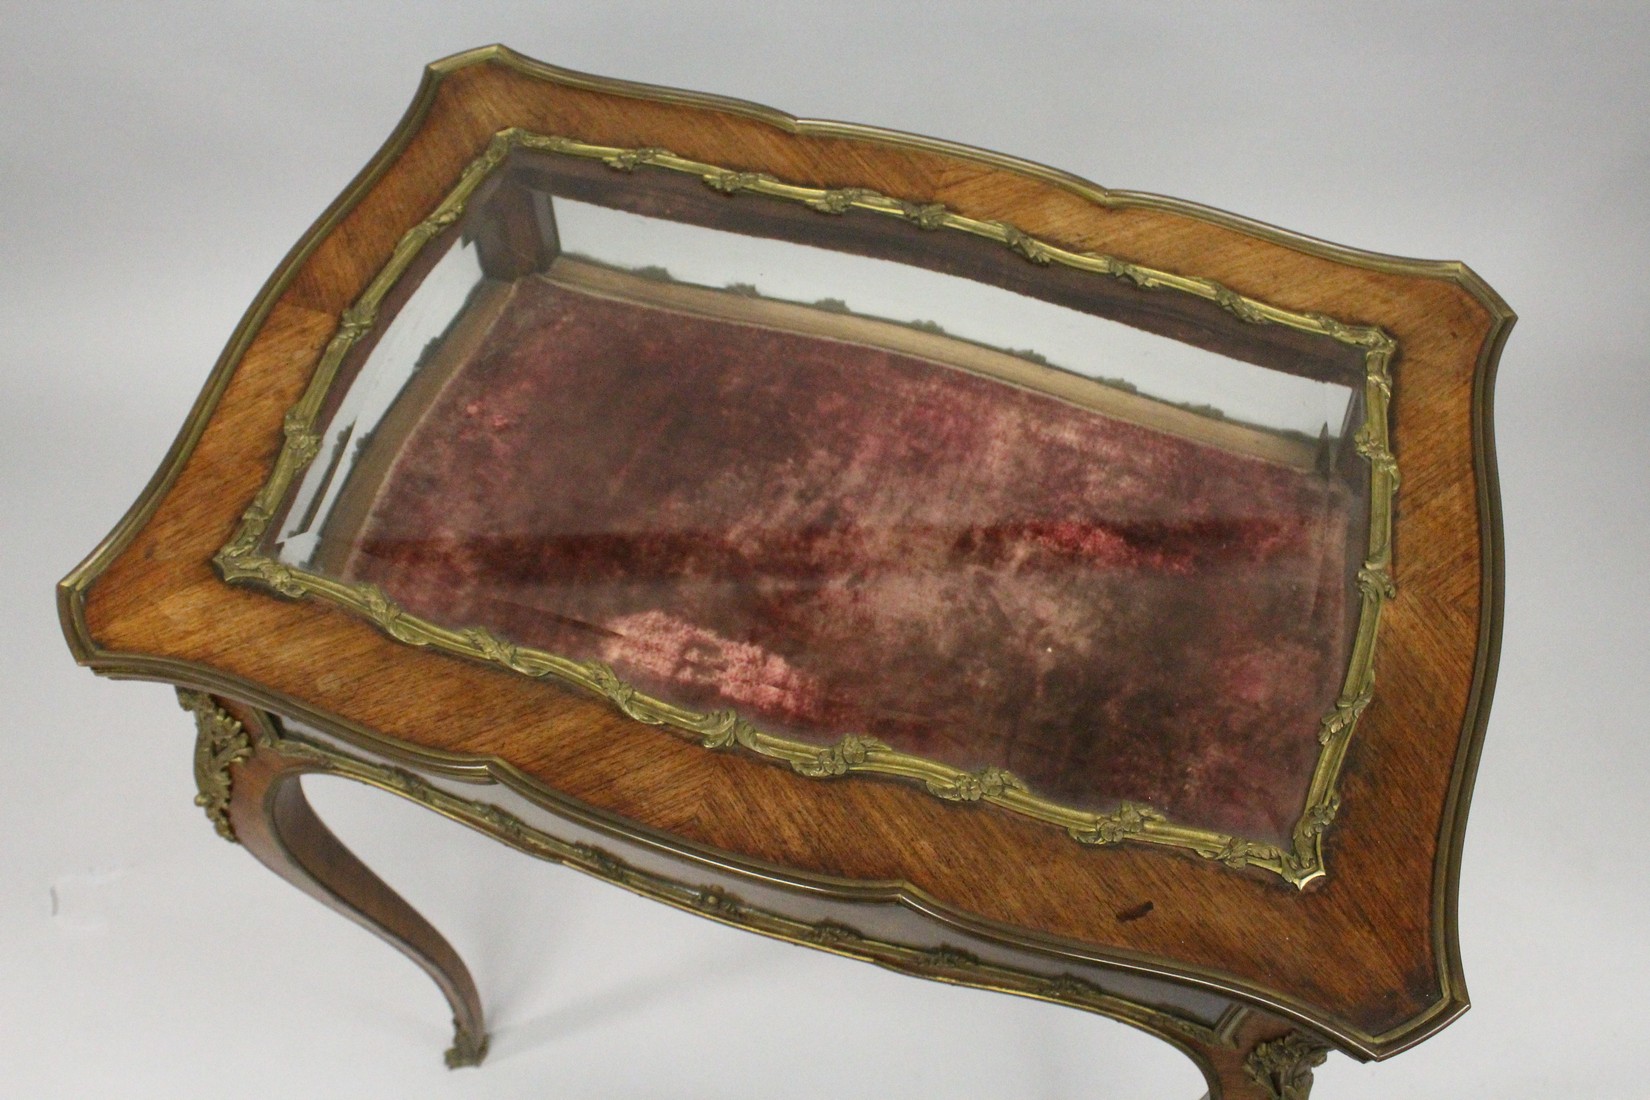 A GOOD 19TH CENTURY FRENCH ROSEWOOD BIJOUTERIE TABLE with ornate mounts, lift-up glazed top, glass - Image 3 of 11